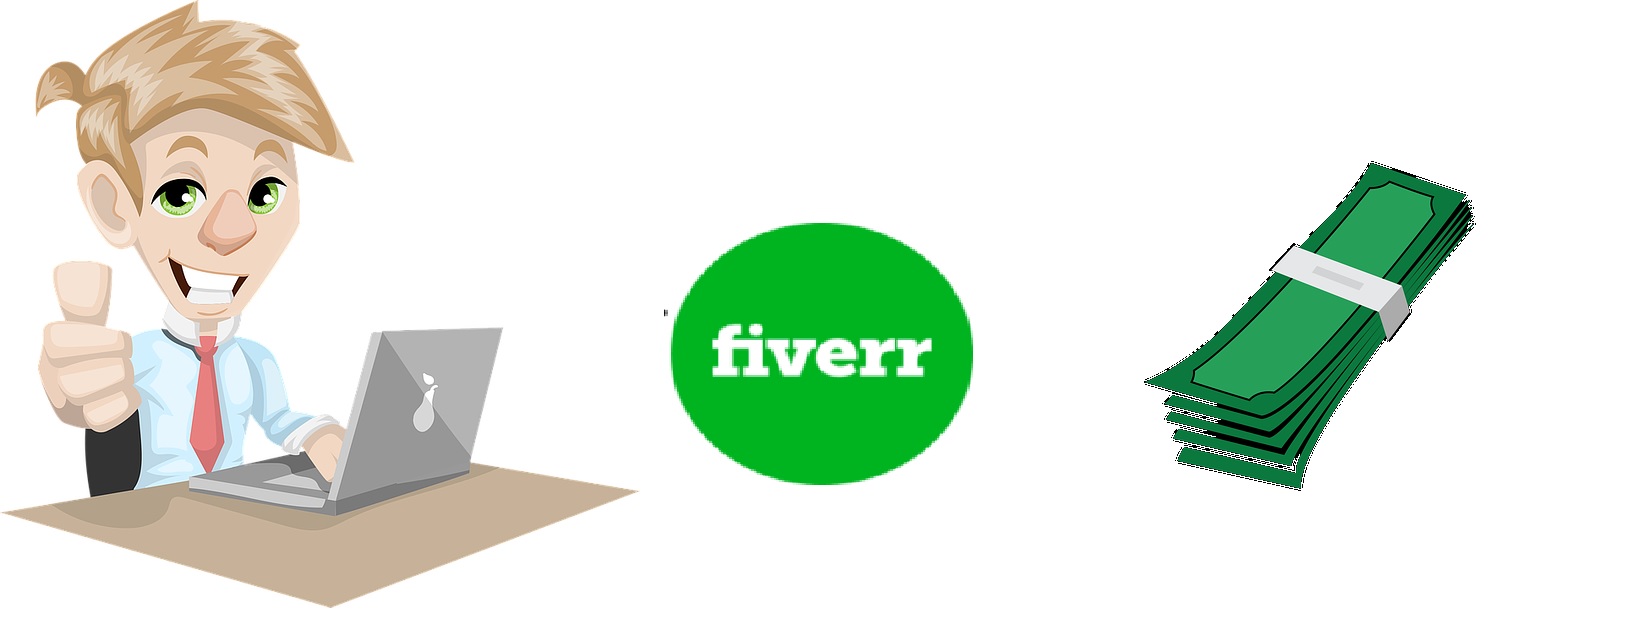 How To Work With Fiverr